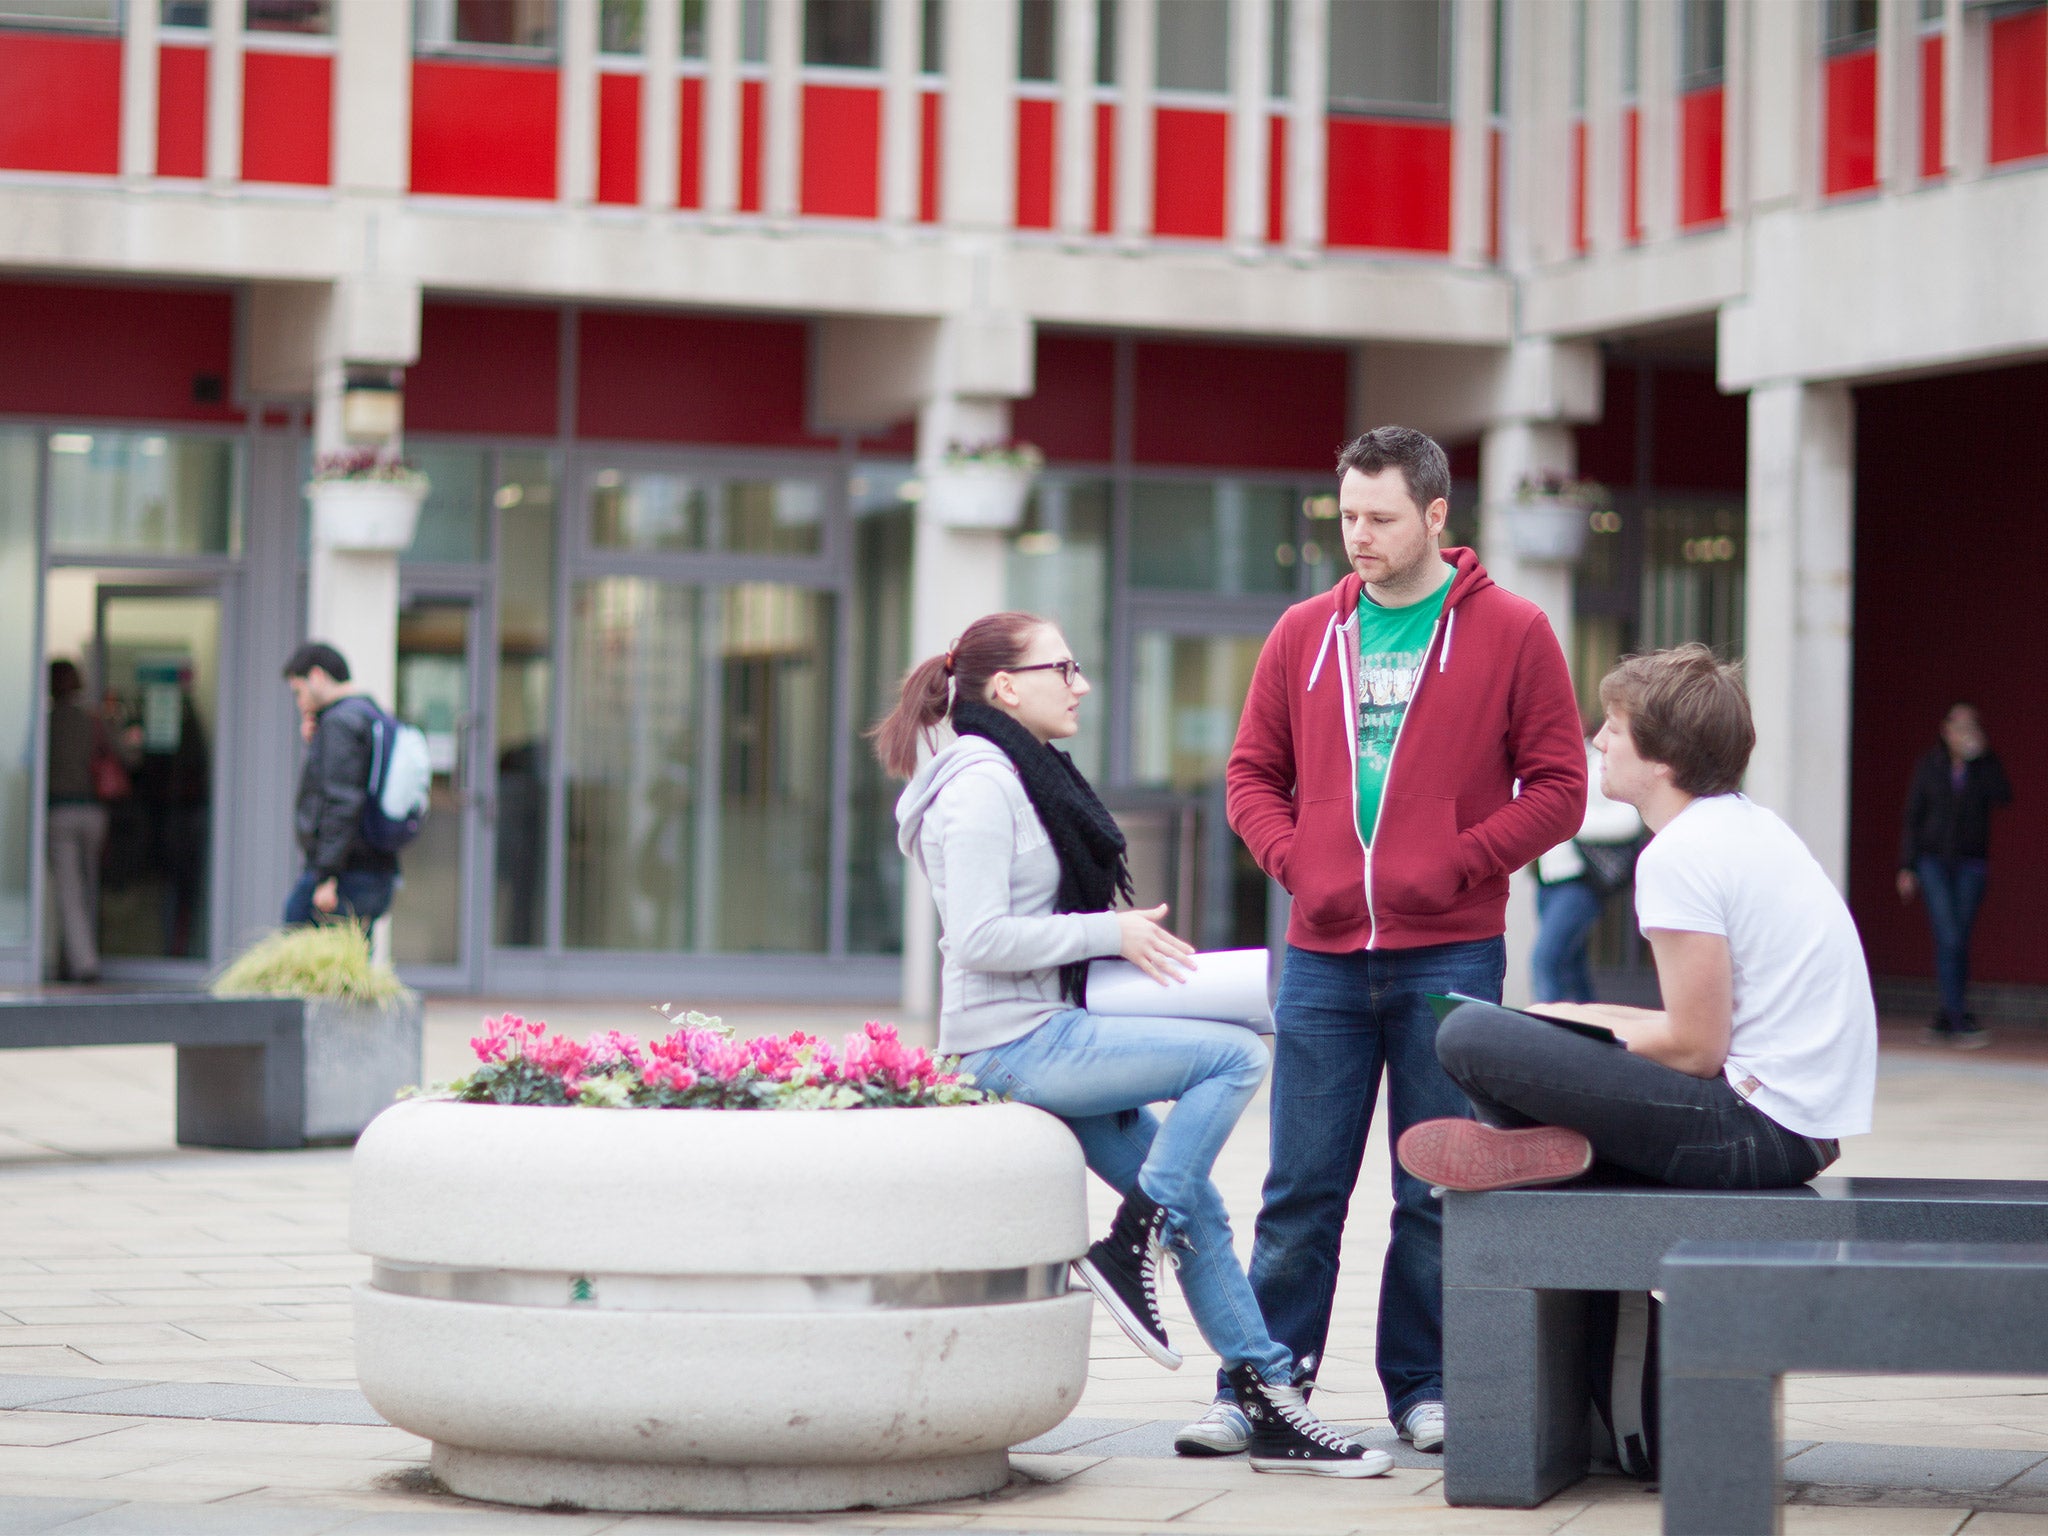 The only way is Essex: today's students on campus